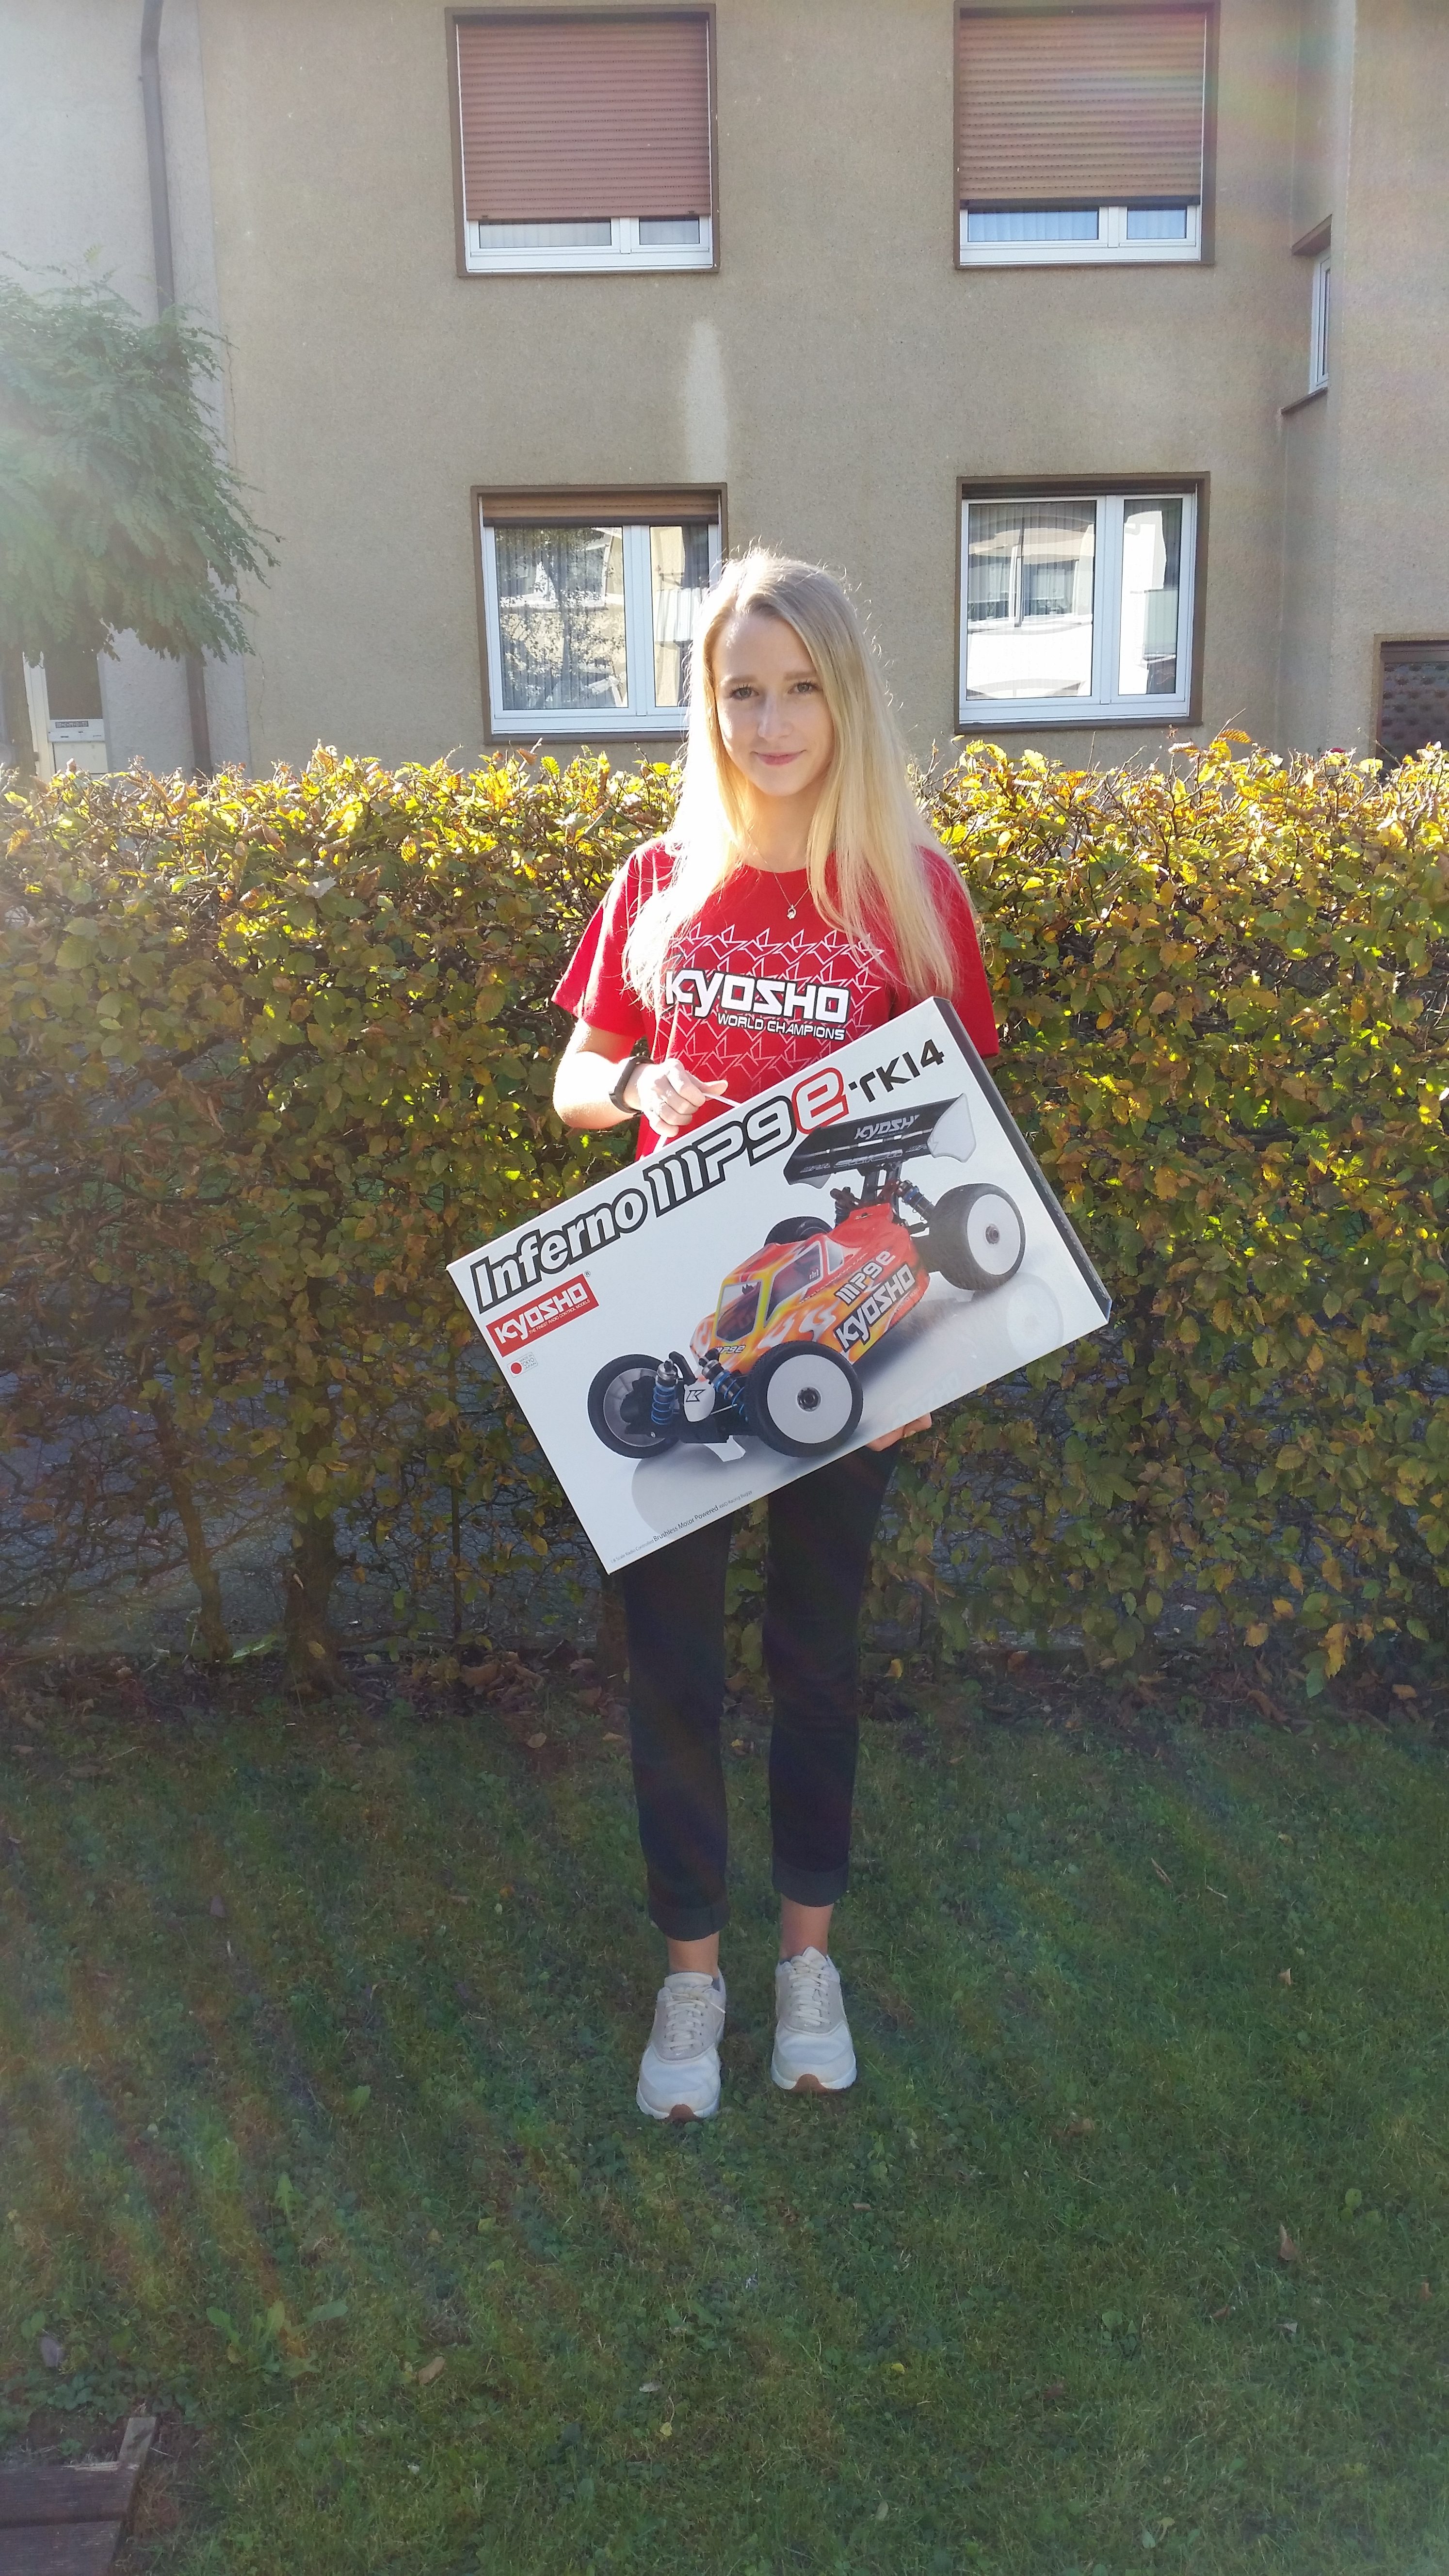 Kyosho Europe is happy to welcome Nadine Langhammer